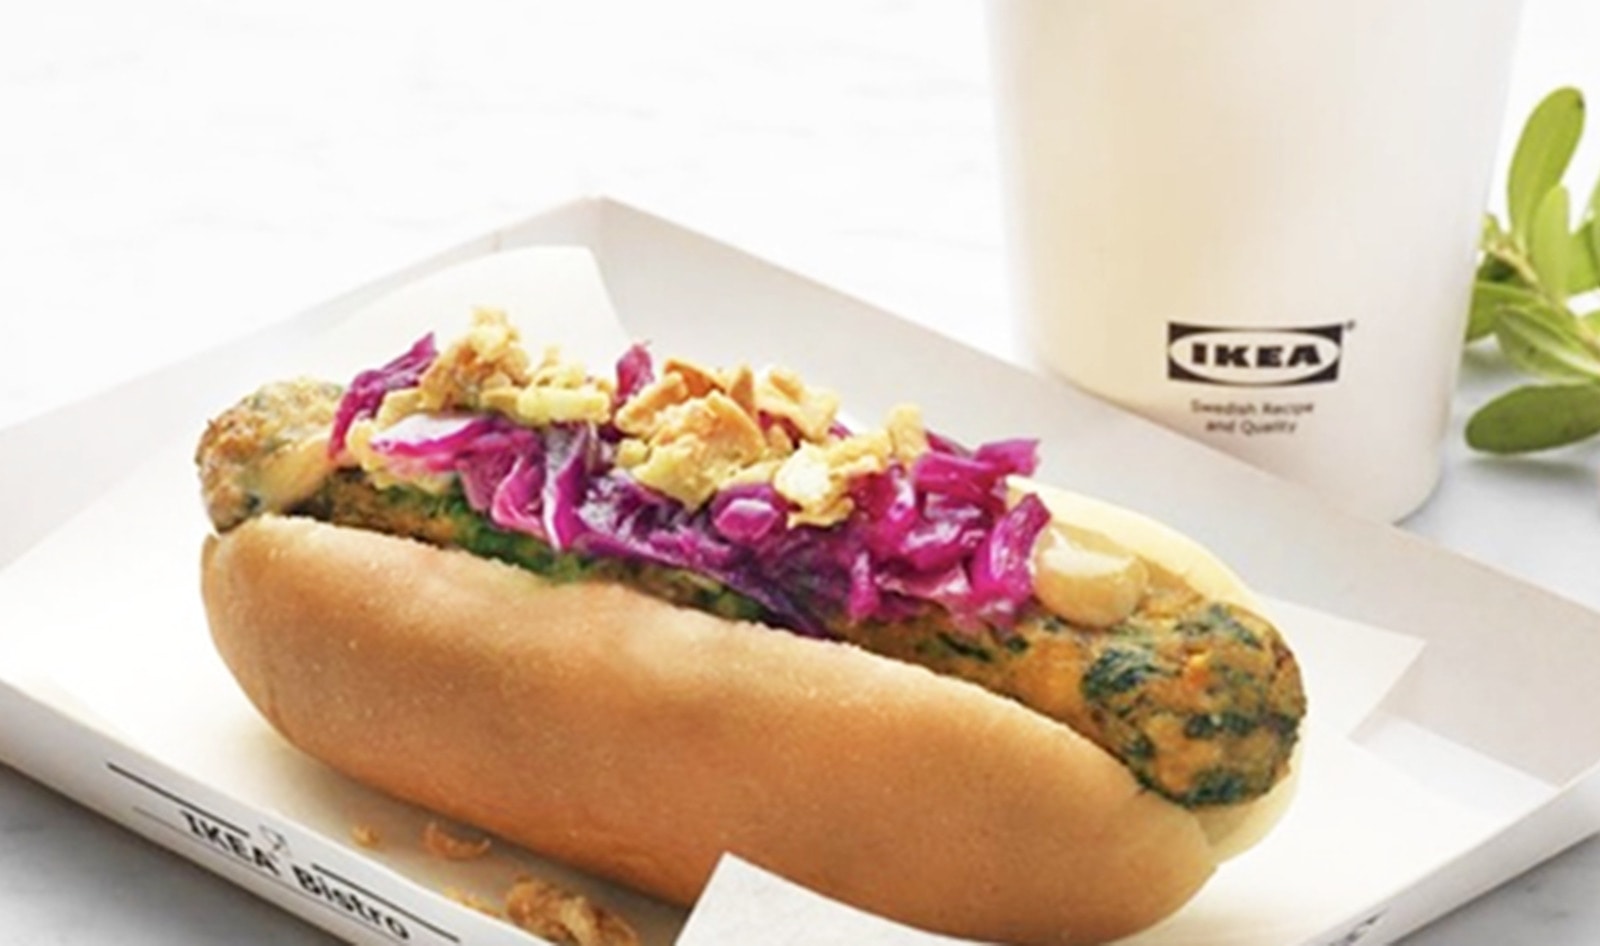 IKEA Vegan Hot Dogs Finally Available Nationwide